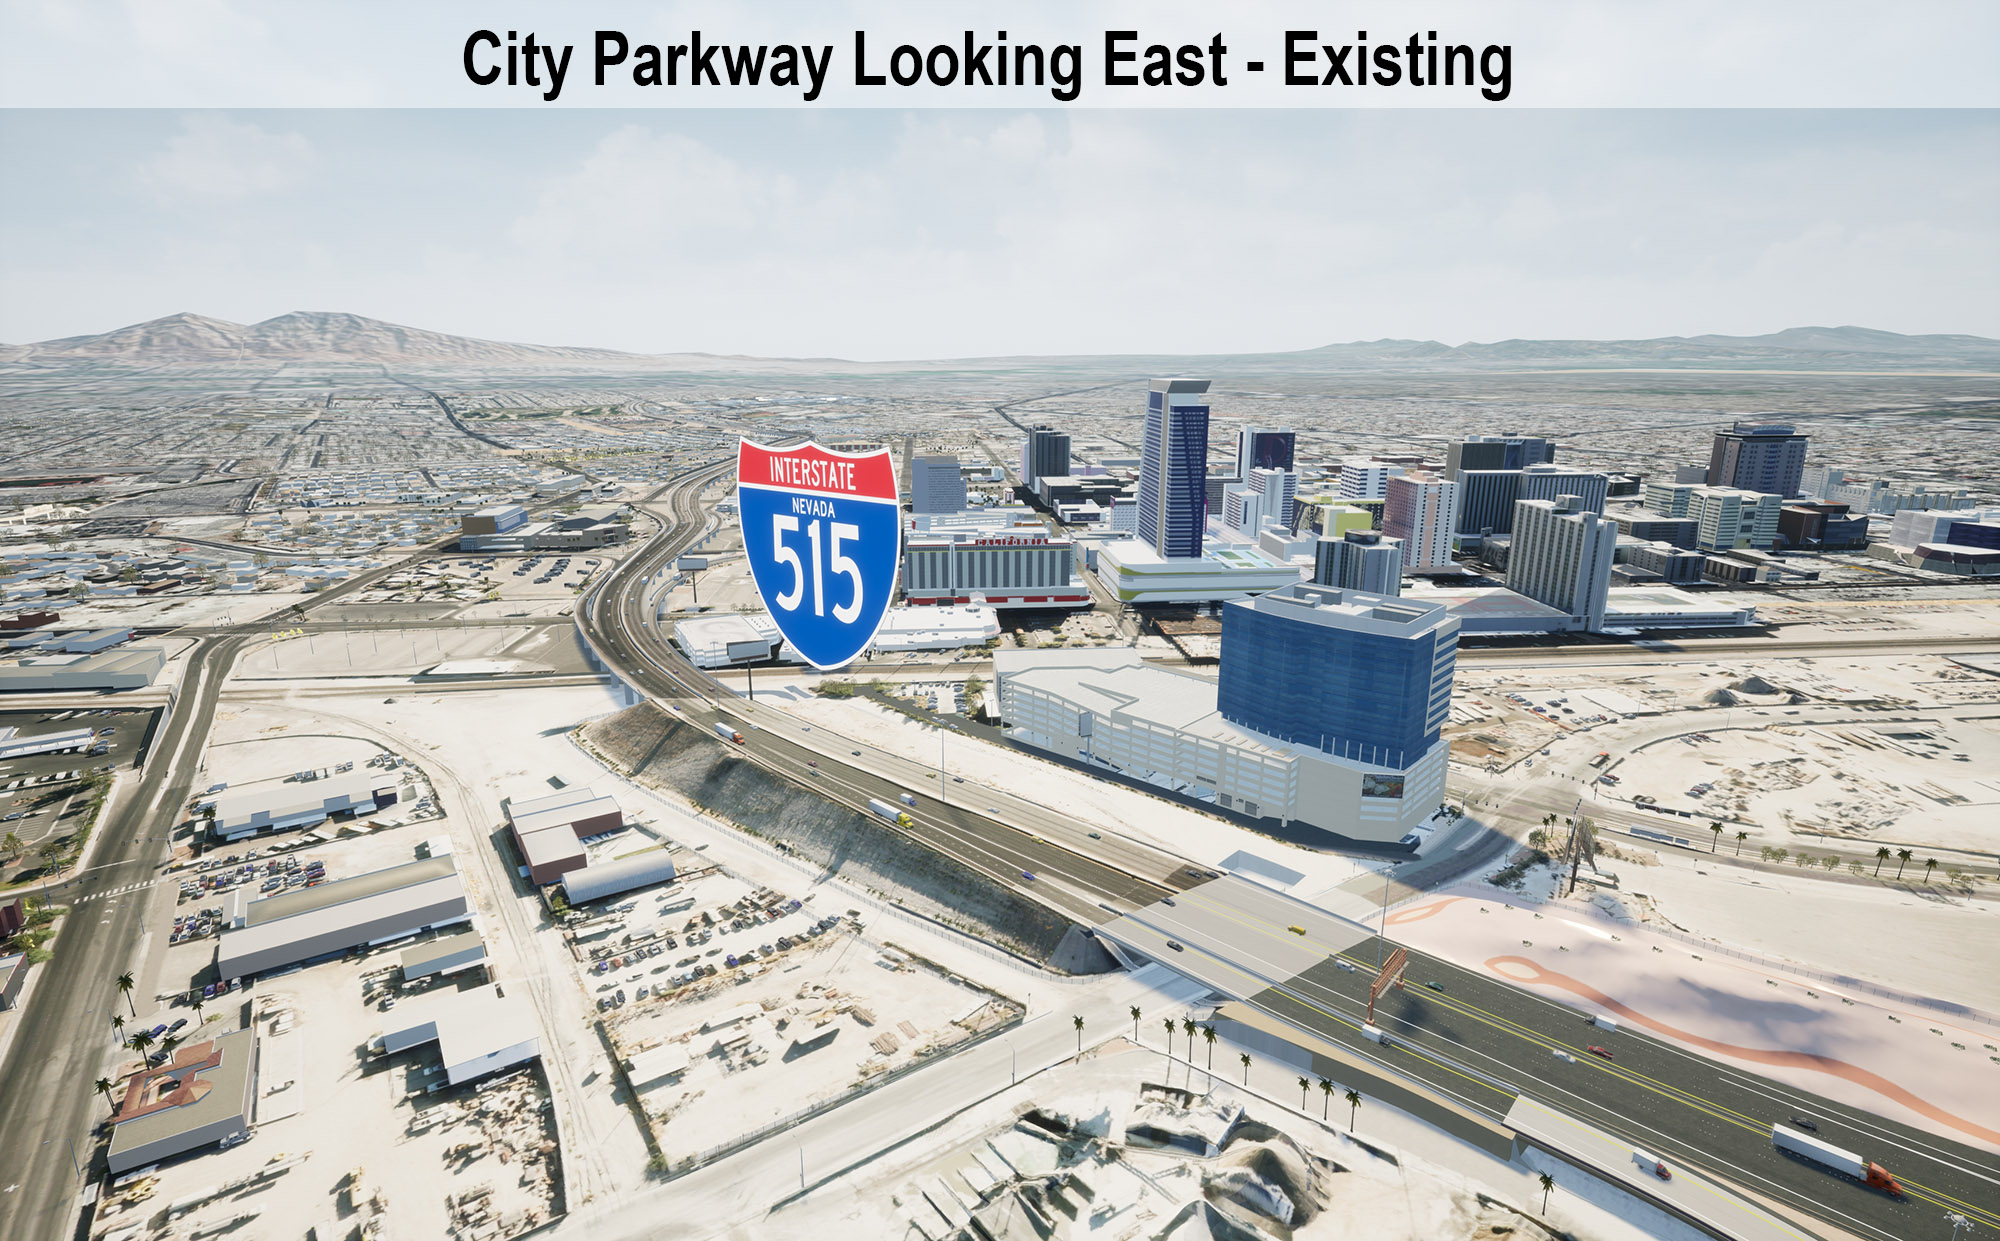 City Parkway Looking East - Existing